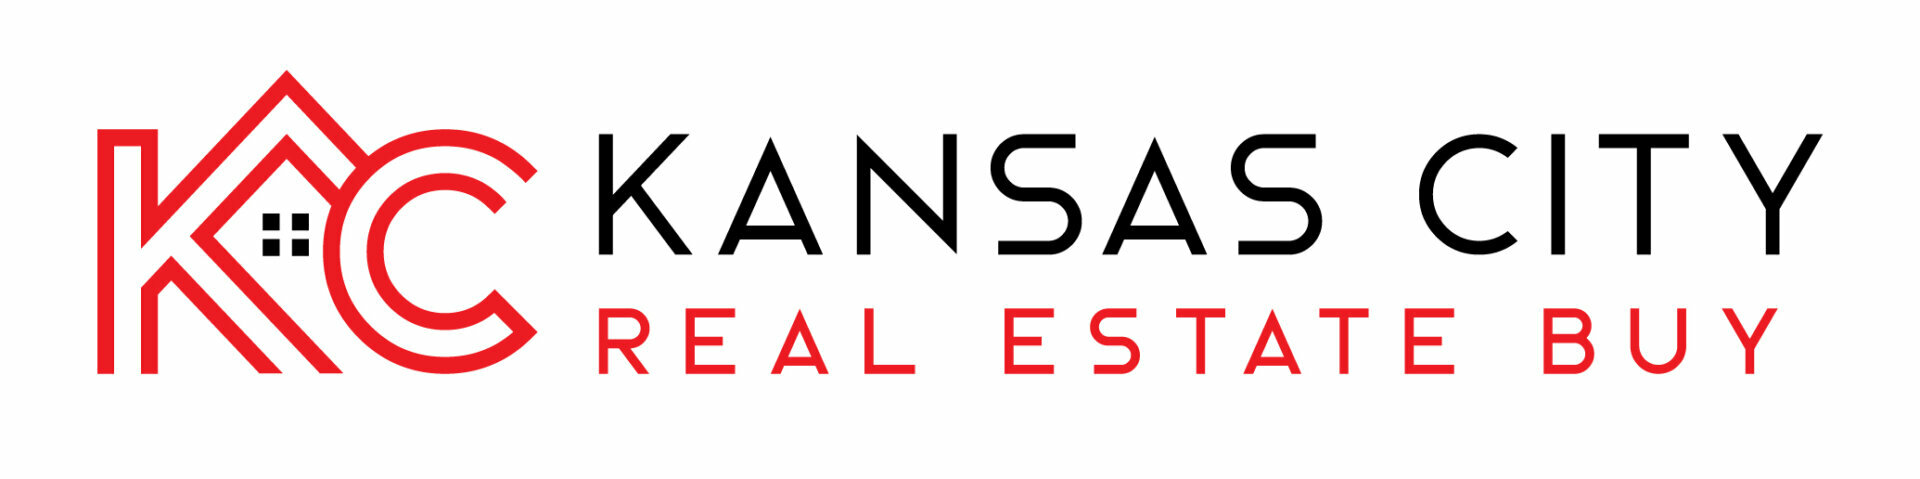 KC Property Connection Expands Into All Kansas/Missouri Markets Enabling Homeowners To Sell Their Homes Fast and Efficiently 21